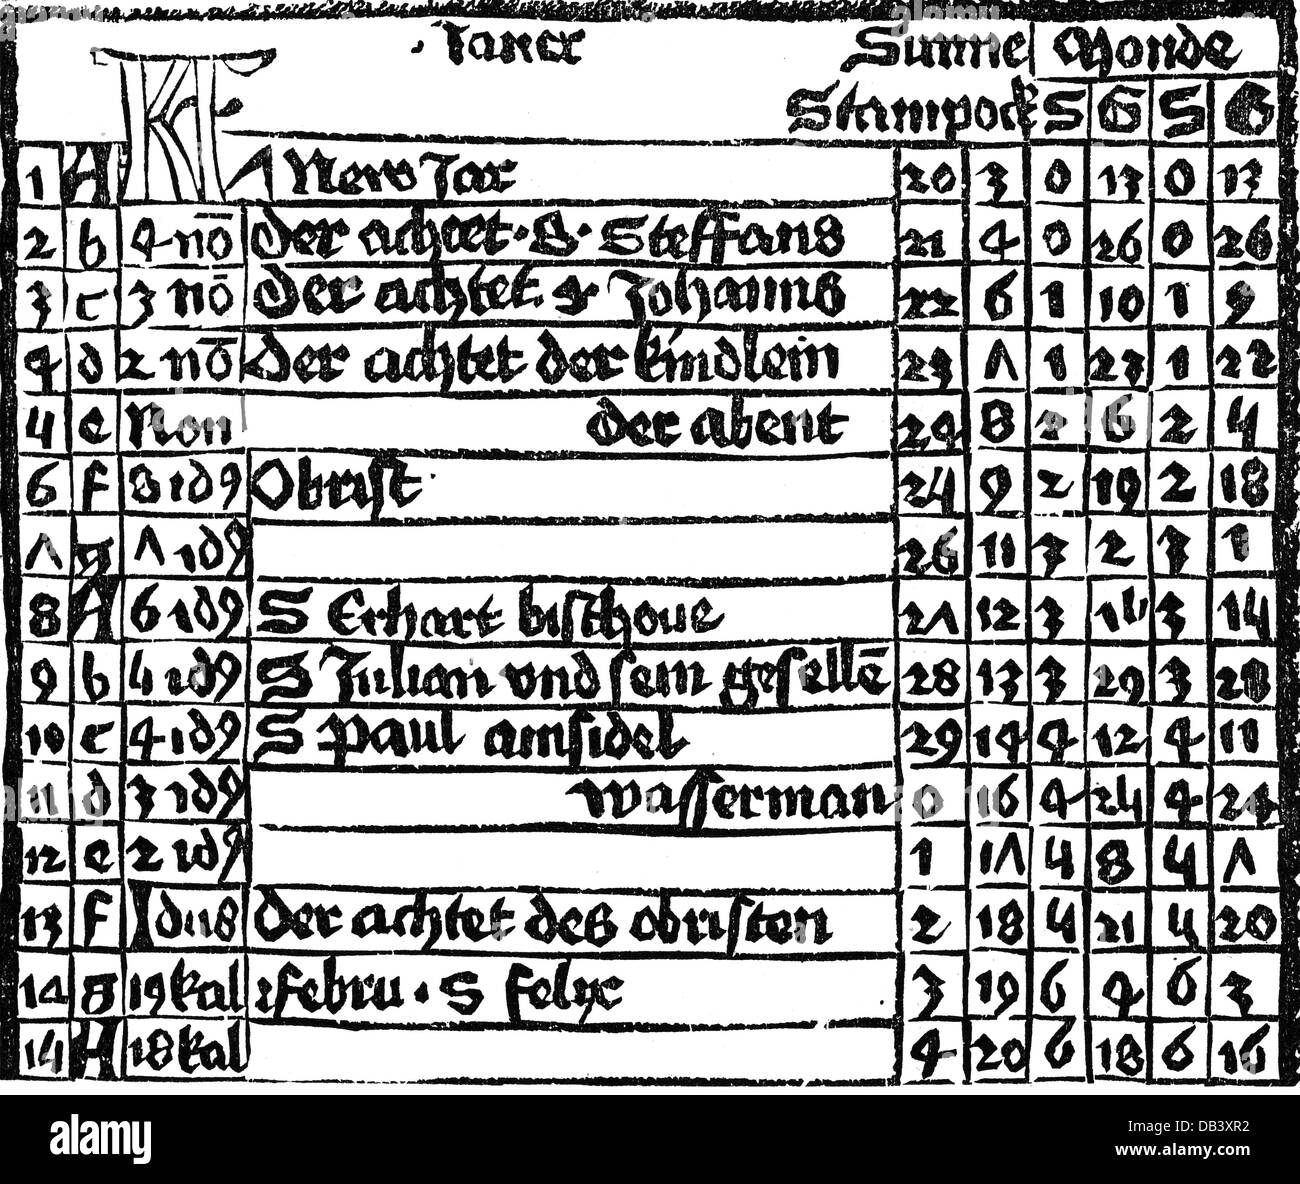 calendar, month of January, astronomic calendar of the Johannes Mueller (Regiomontanus), detail, woodcut, 15th century, Julian calendar, saint, hallow, saints, day, days, astronomy, Middle Ages, Germany, historic, historical, medieval, Additional-Rights-Clearences-Not Available Stock Photo